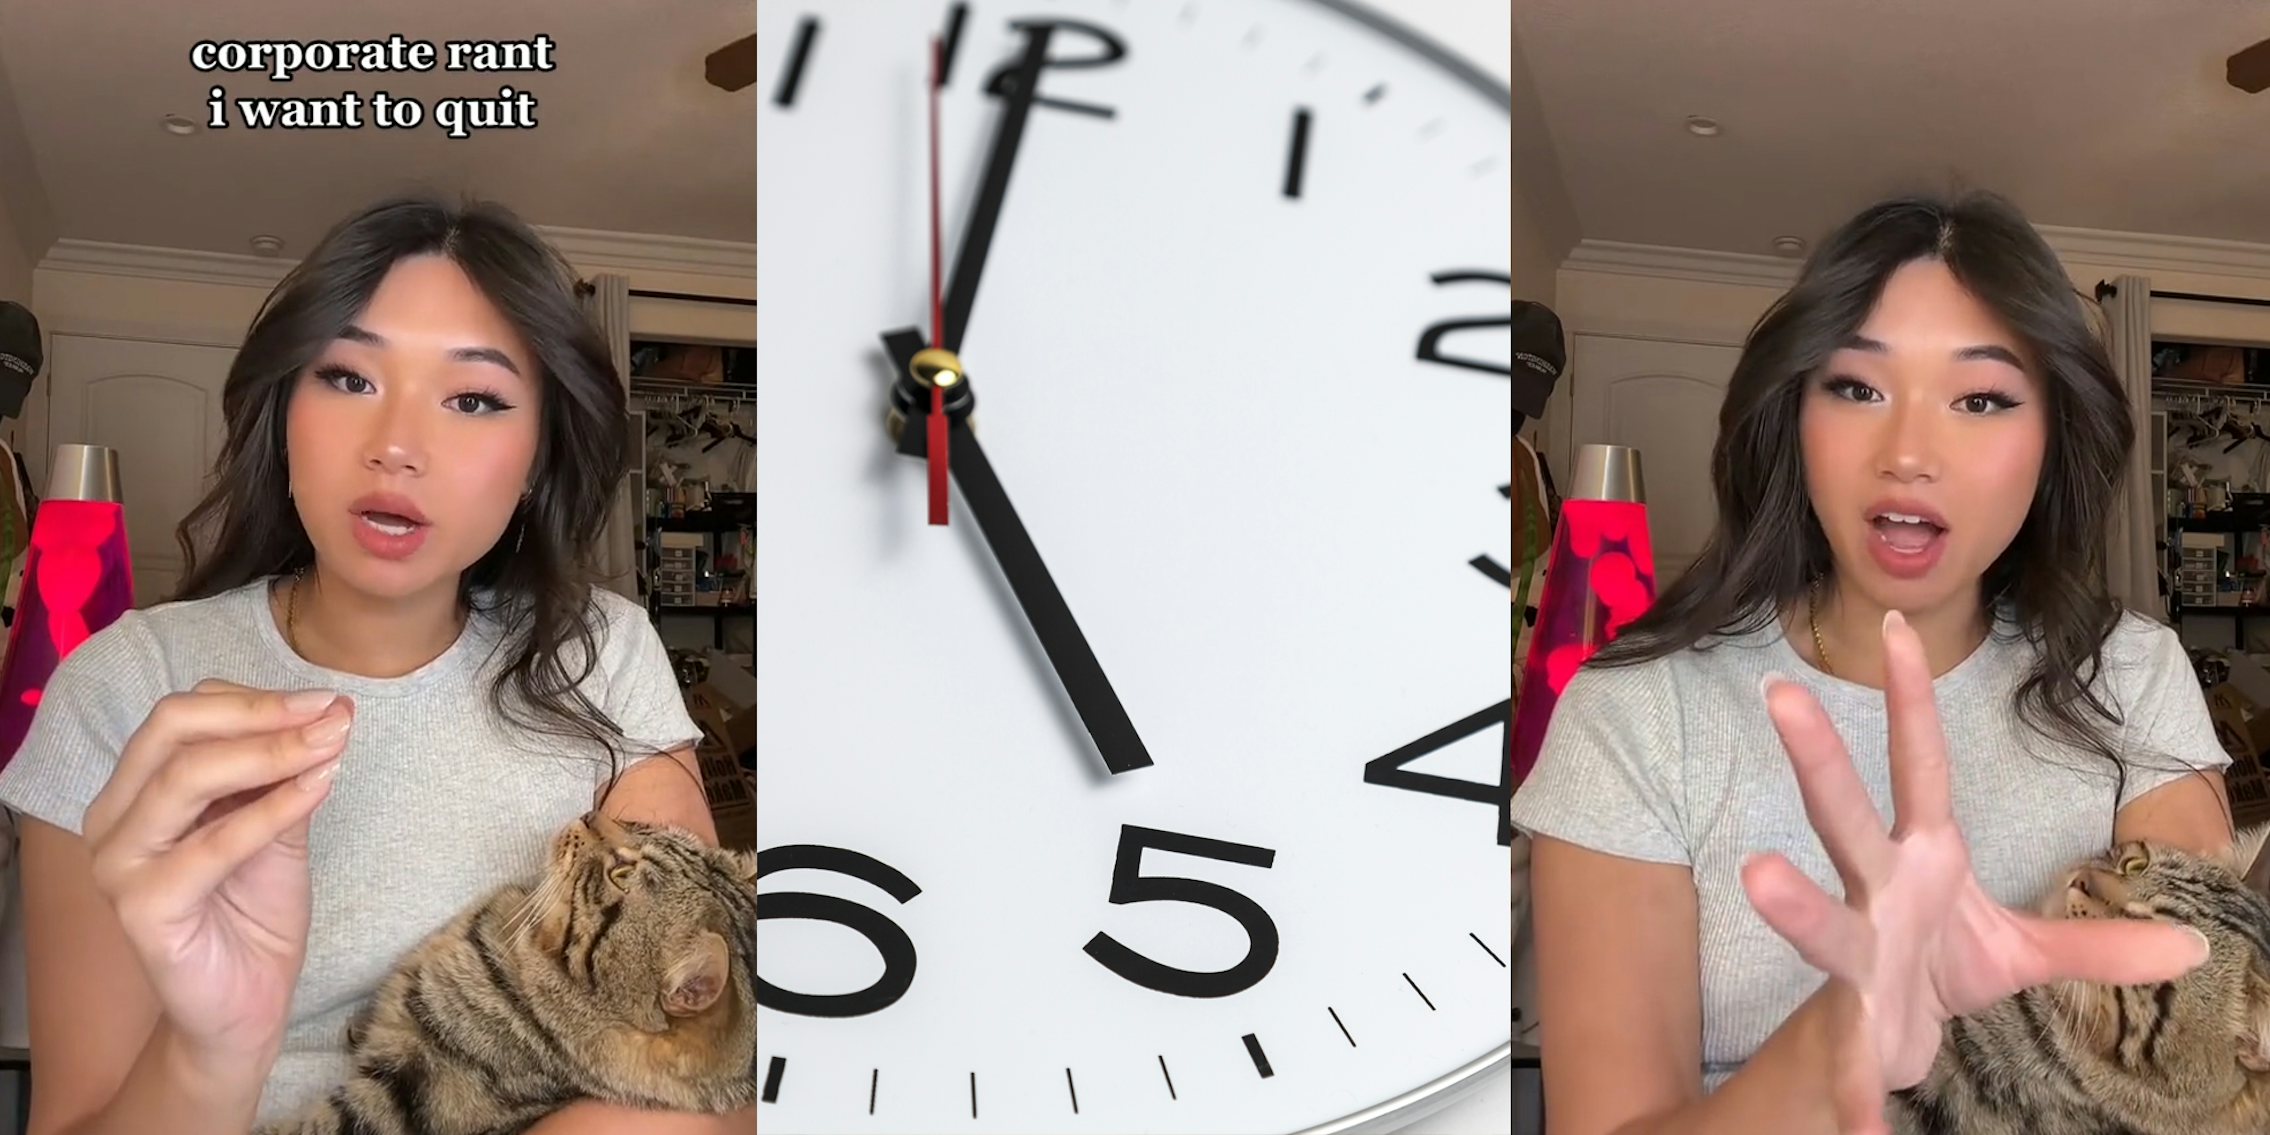 woman speaking with caption 'corporate rant i want to quit' (l) 5 on clock (c) woman speaking with hand out (r)